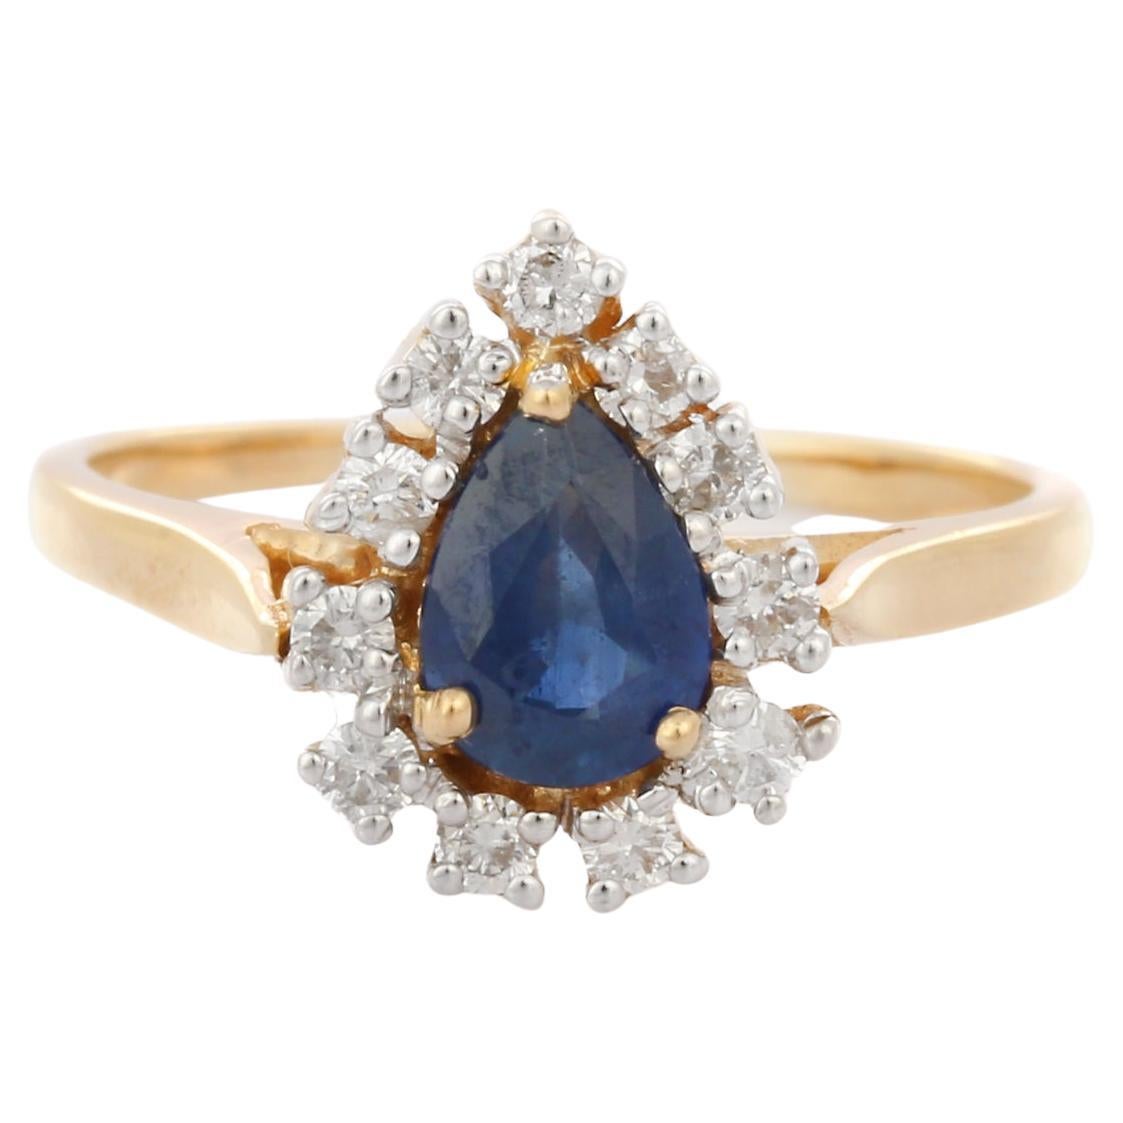 For Sale:  18K Yellow Gold Magnificent Pear Sapphire Engagement Ring Mounted with Diamonds